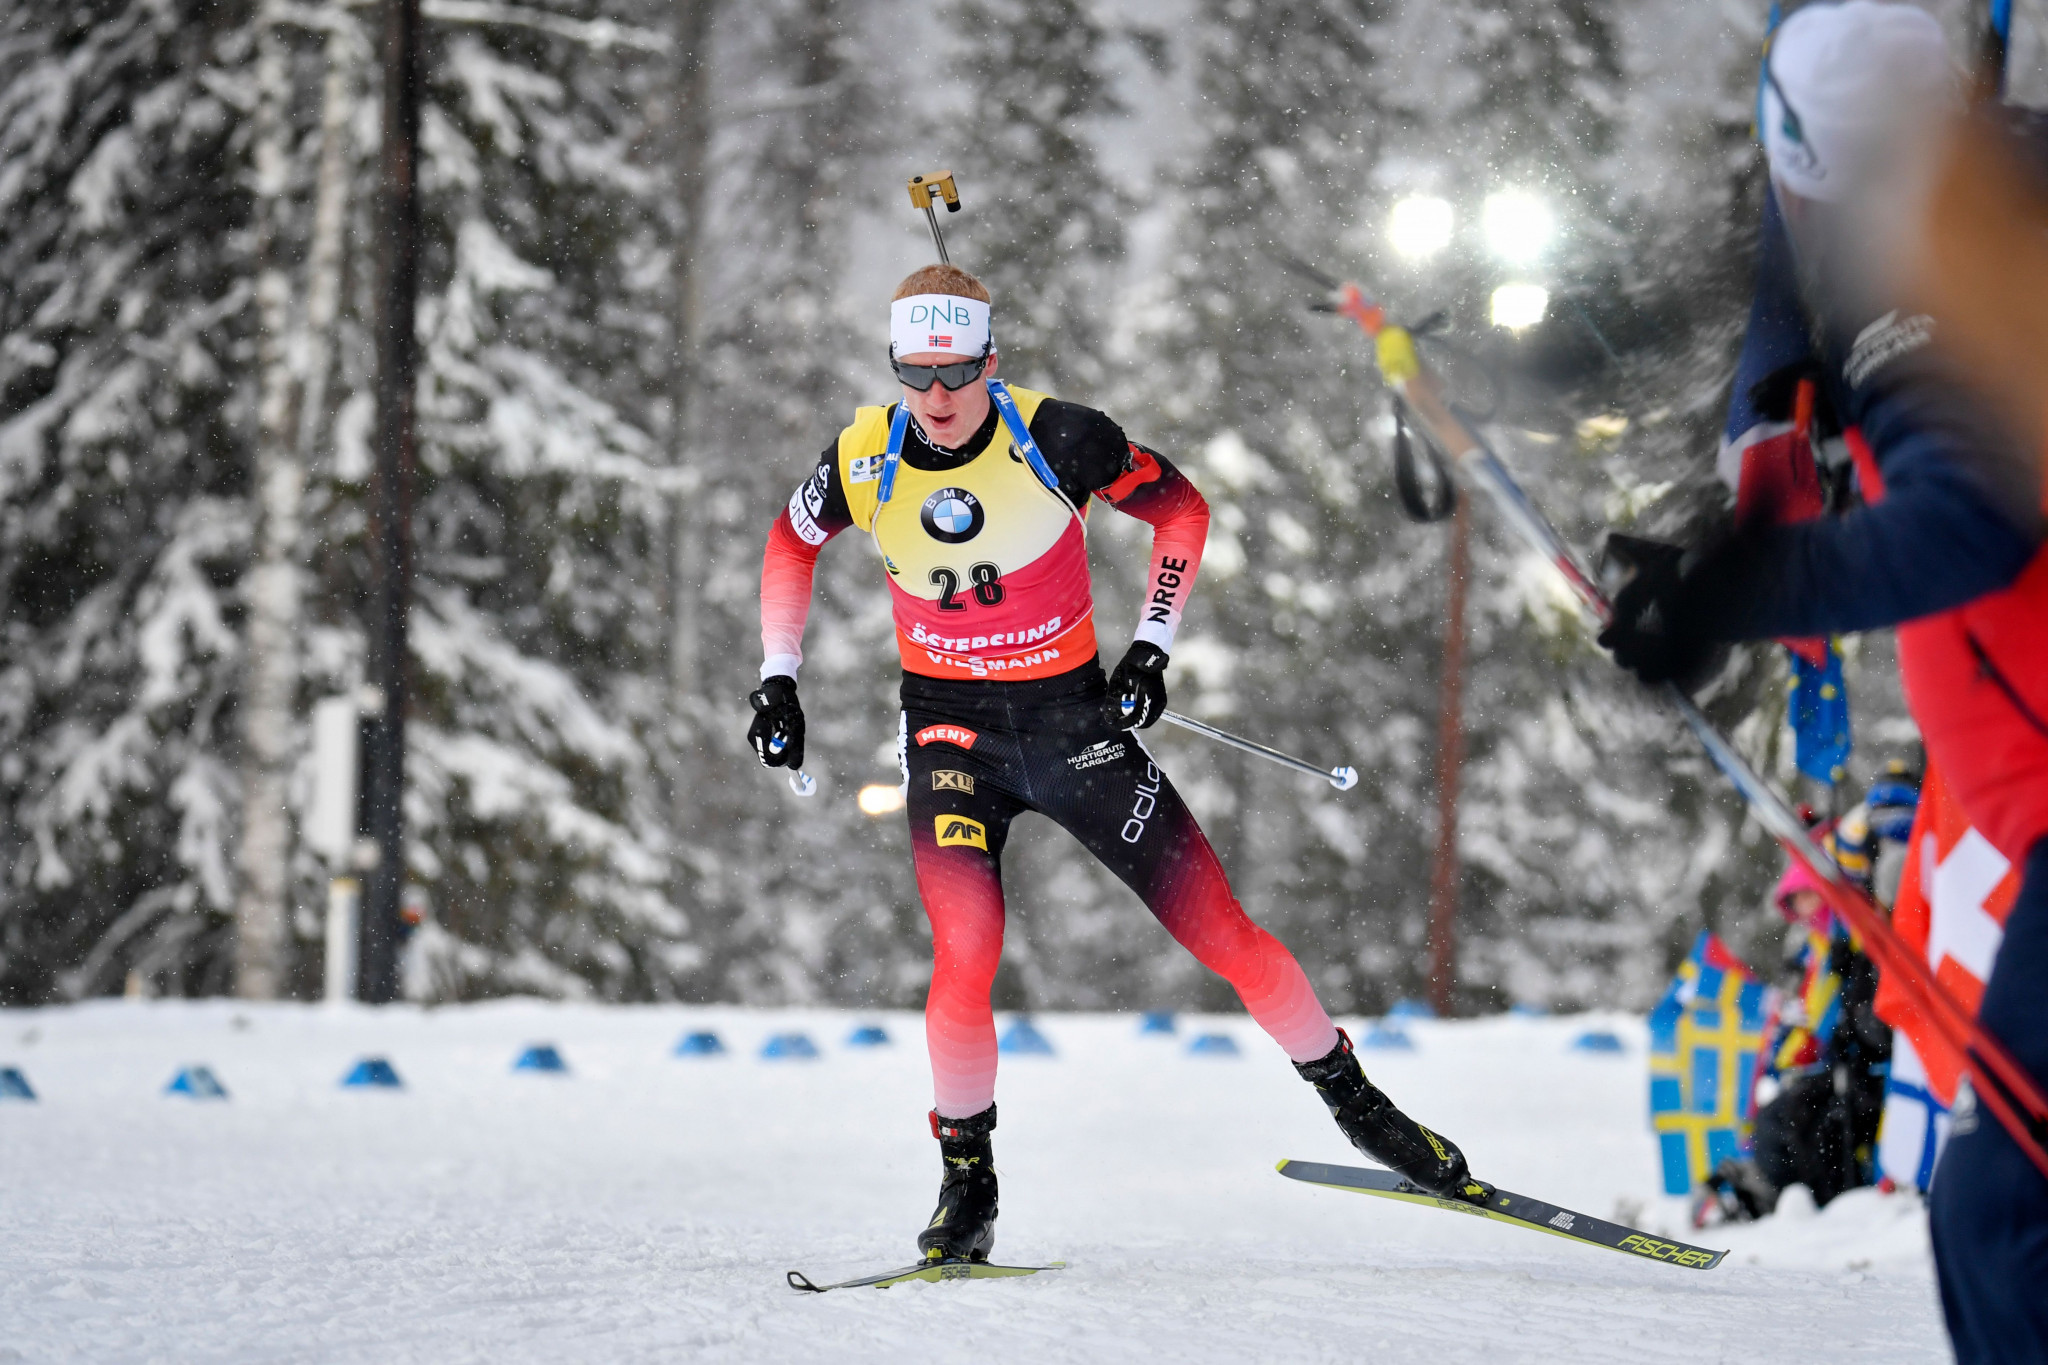 Norway's Johannes Thingnes Bø secured his second gold medal of the International Biathlon Union World Championships ©Getty Images